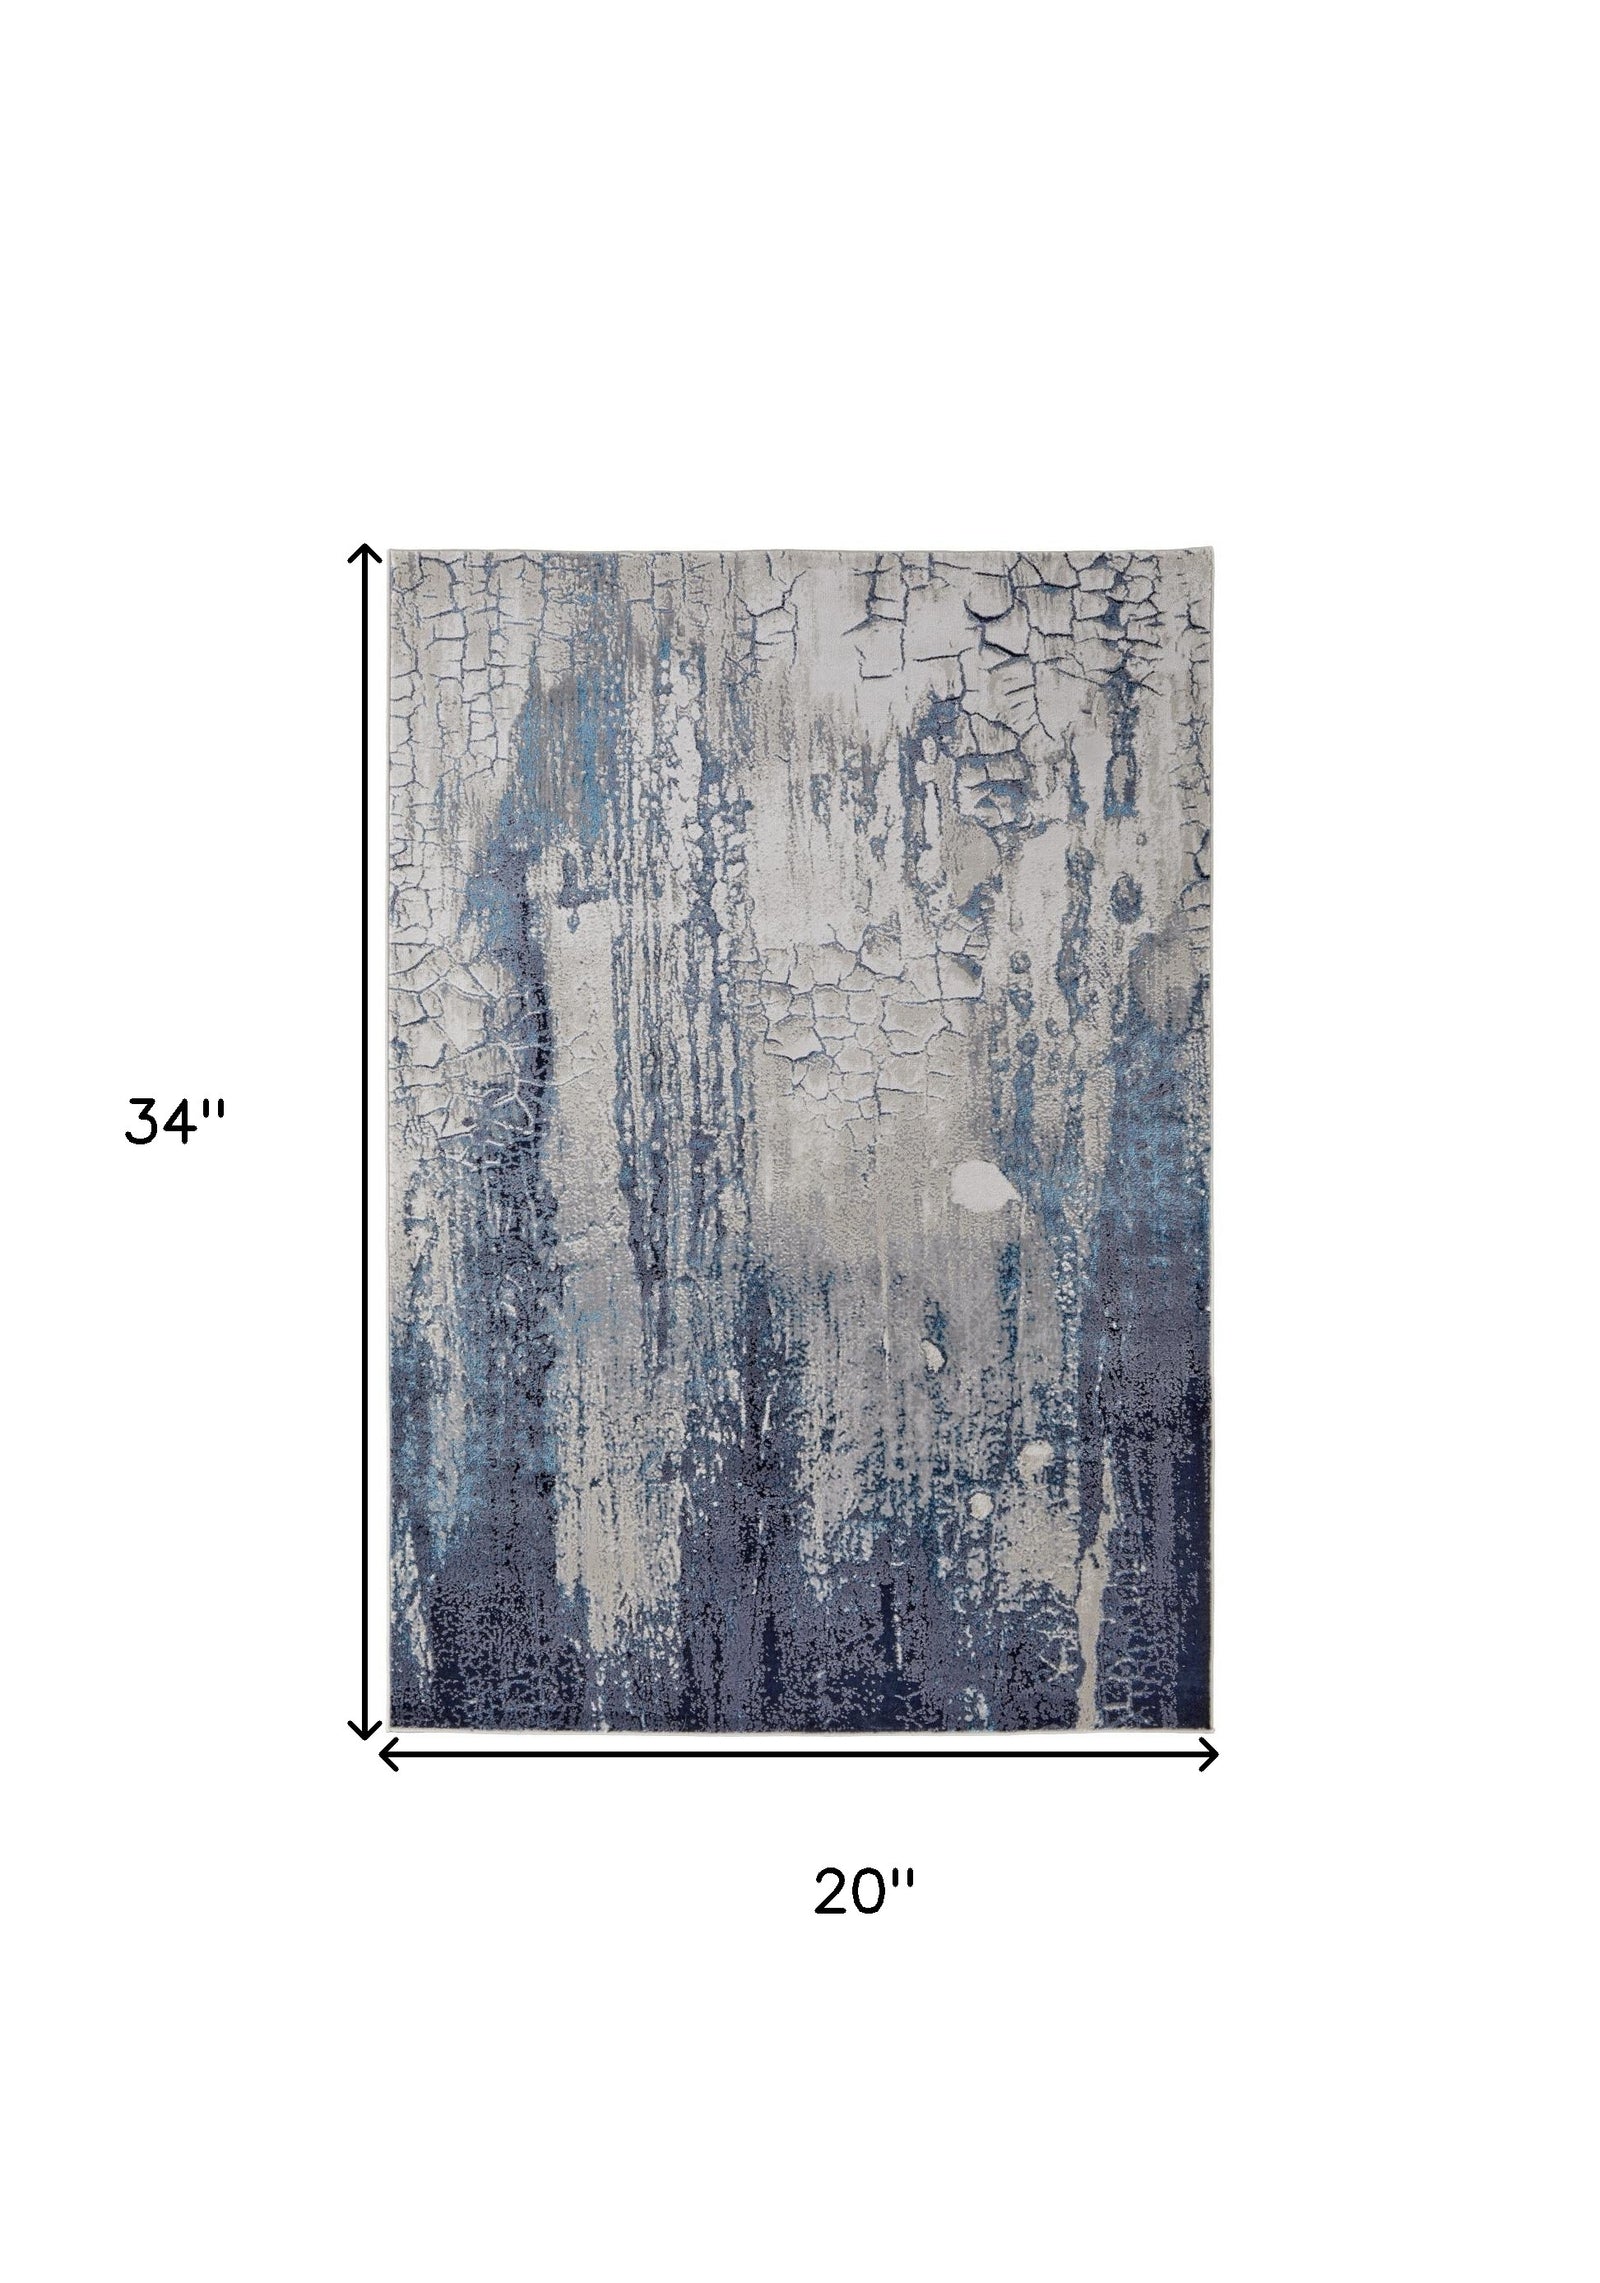 2' X 3' Ivory Blue And Black Abstract Power Loom Distressed Area Rug